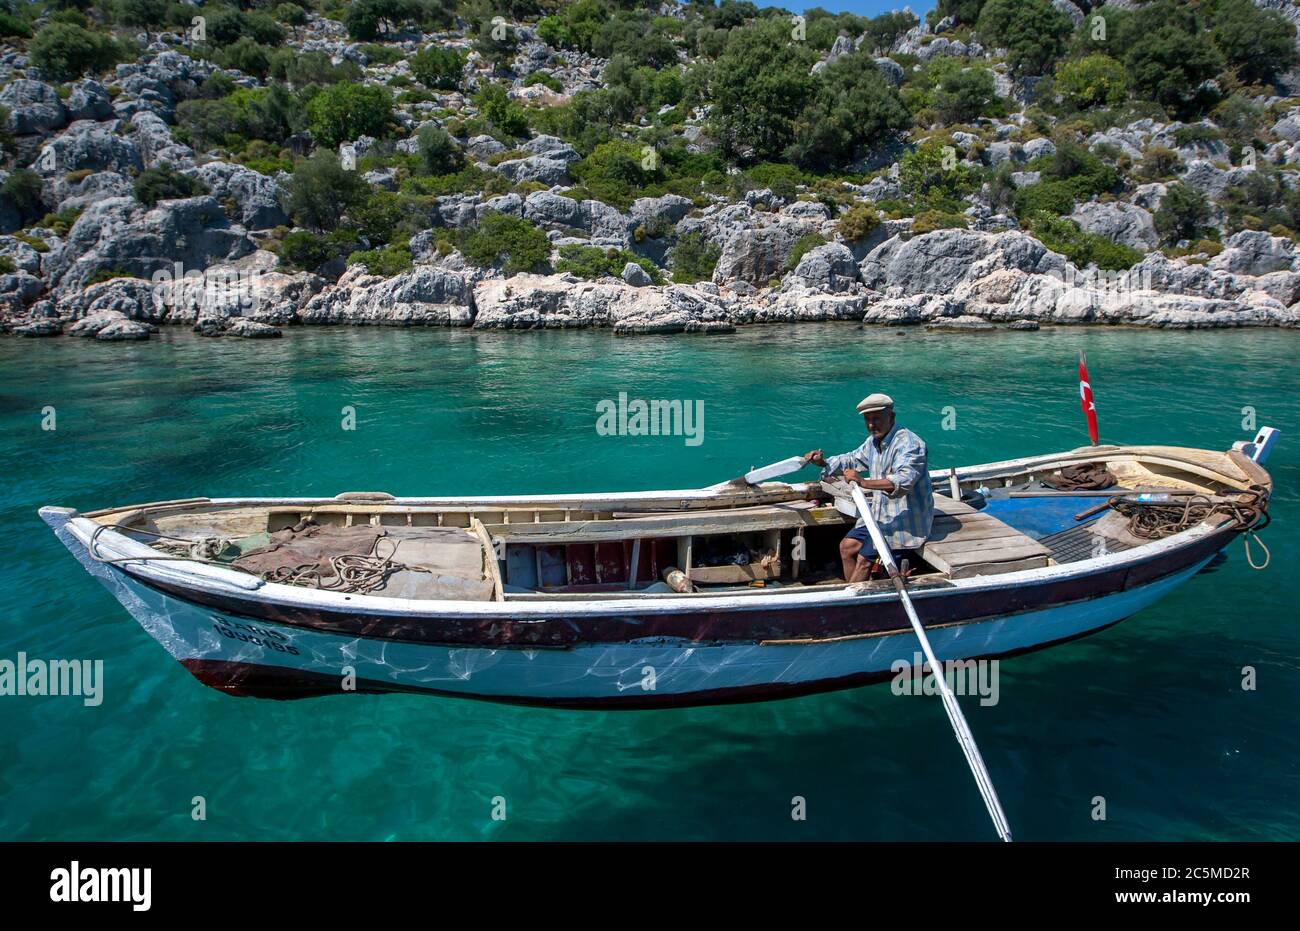 A Turkish man rows his boat through the turquoise water adjacent to Kekova Island in Turkey. Stock Photo